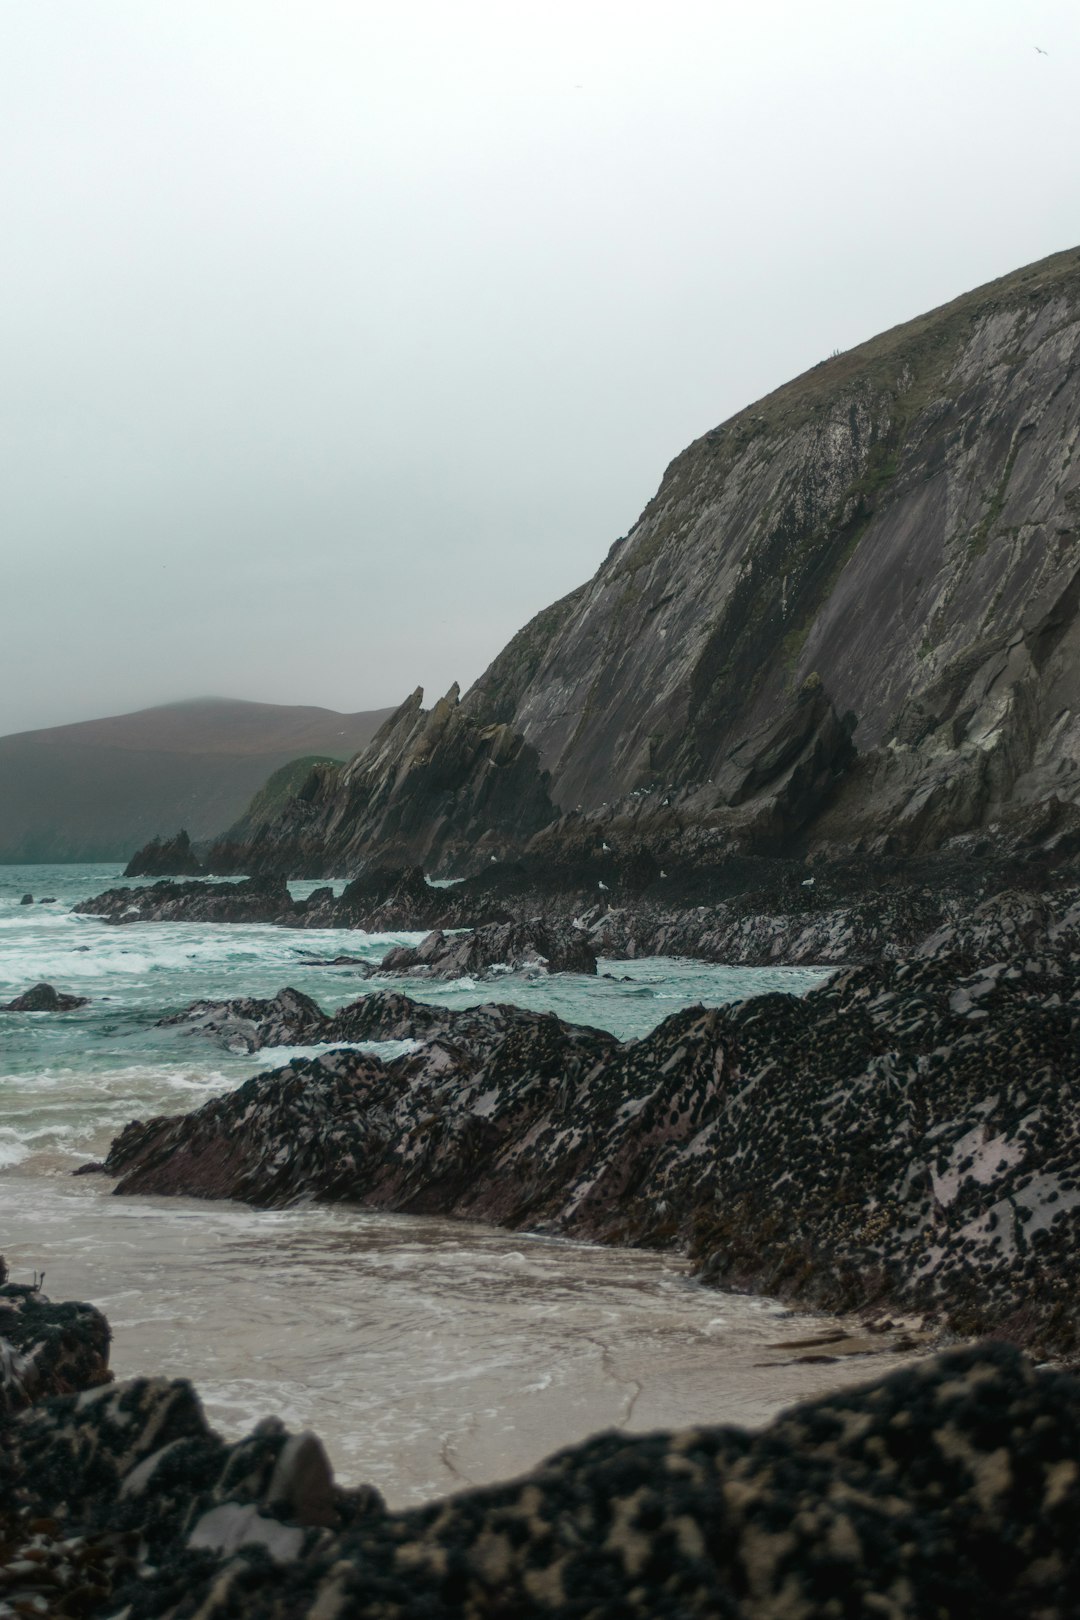 Travel Tips and Stories of Dingle in Ireland